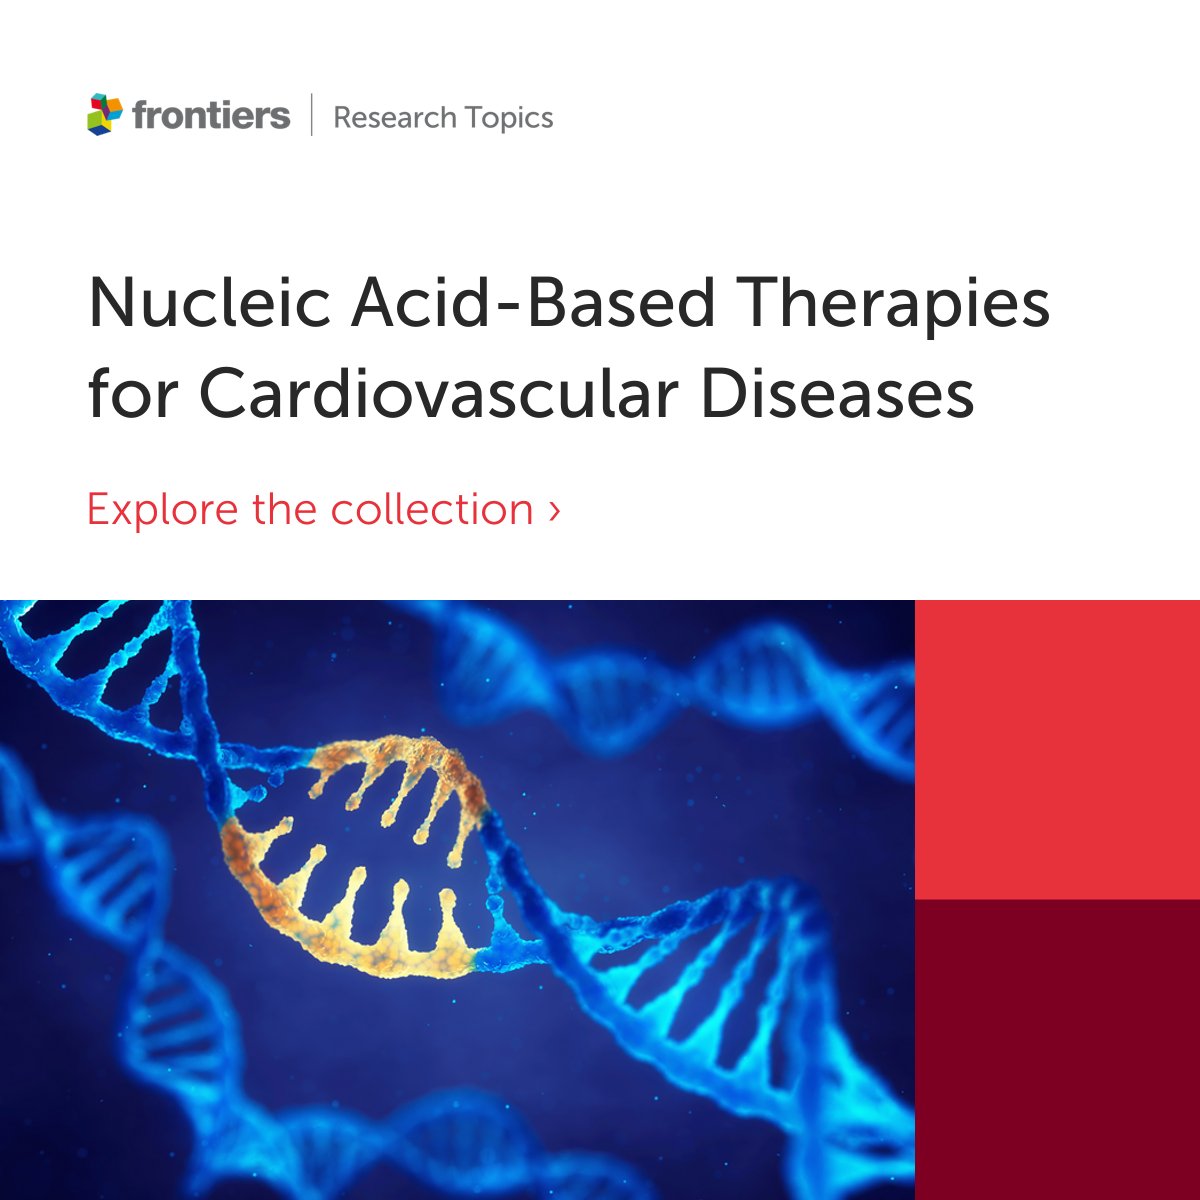 Proudly Presenting “Nucleic Acid-Based Therapies for Cardiovascular Diseases” Open-Access article collection hosted by Andrea Caporali, Fabio Martelli, and Paras Kumar Mishra 🫀 Explore the collection here👉frontiersin.org/research-topic… #RNAtherapeutics #CardiovascularTreatment